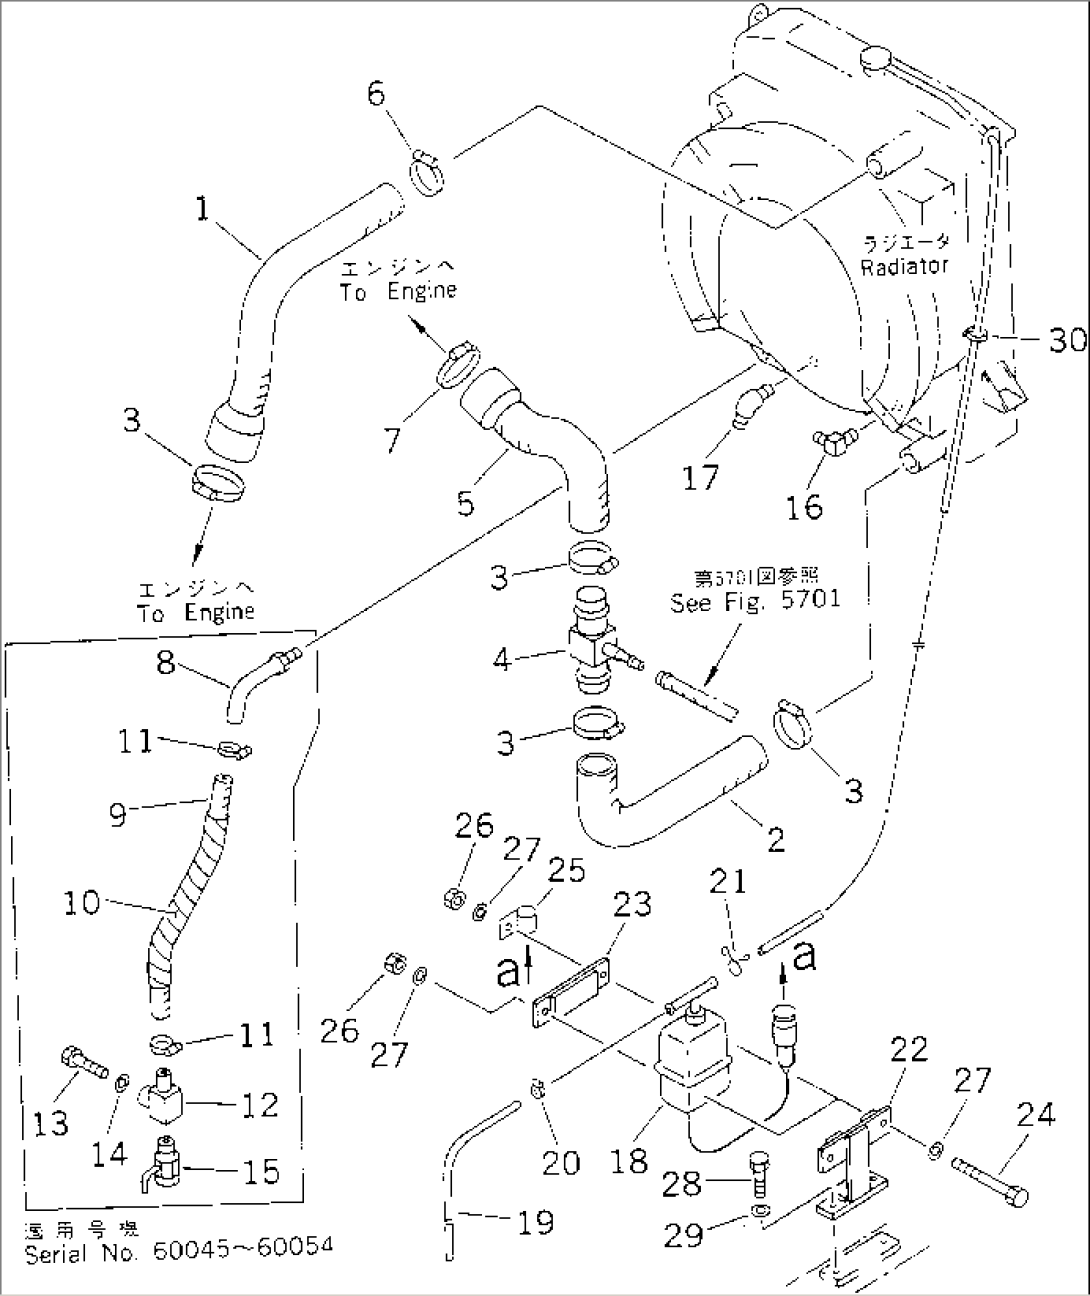 RADIATOR PIPING (WITH CAR HEATER)(#60045-)